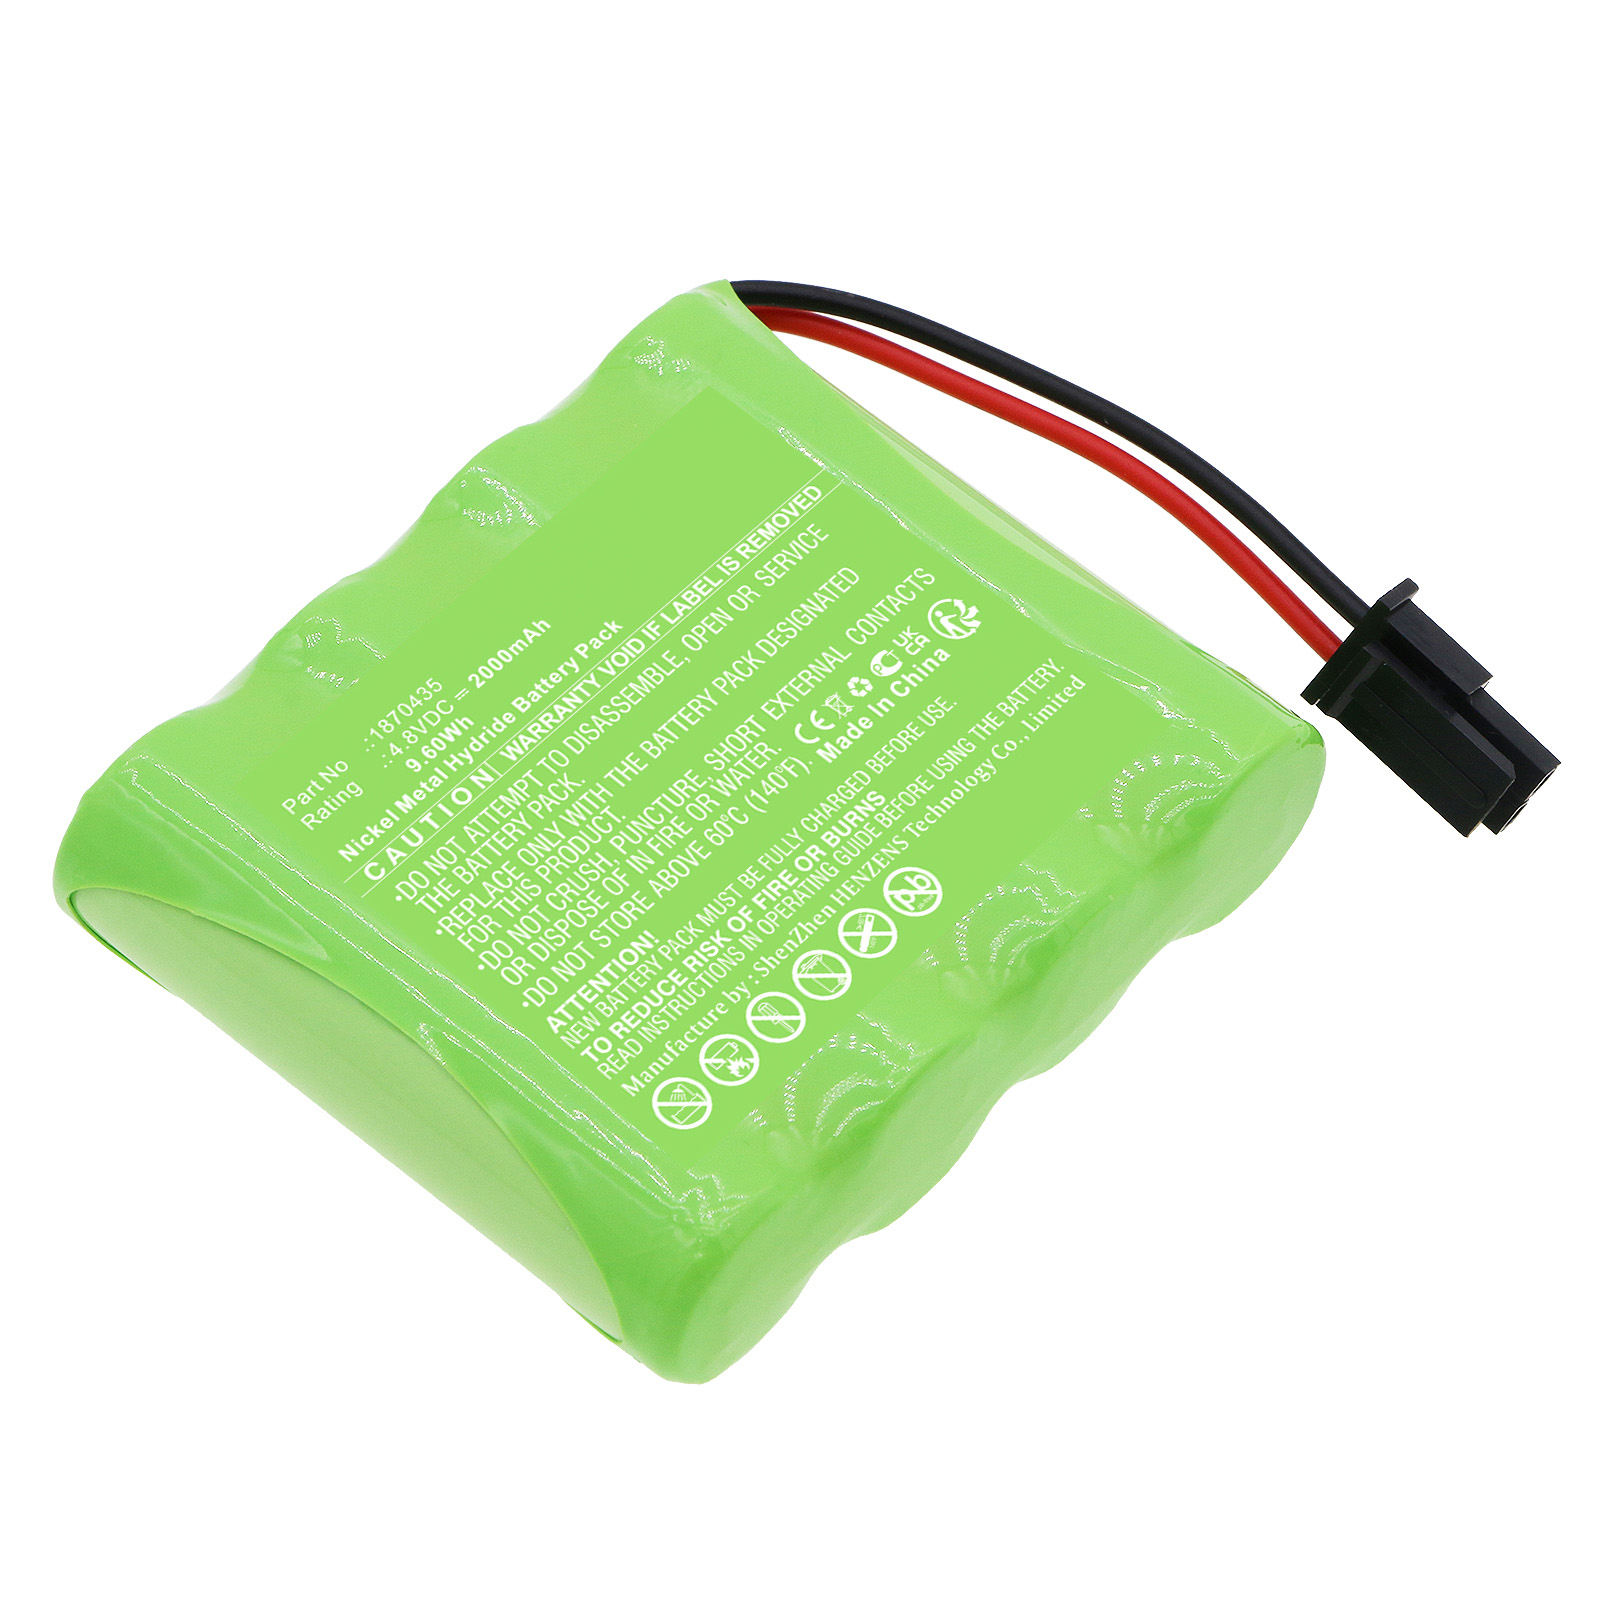 Synergy Digital Medical Battery, Compatible with Philips 1870435 Medical Battery (Ni-MH, 4.8V, 2000mAh)